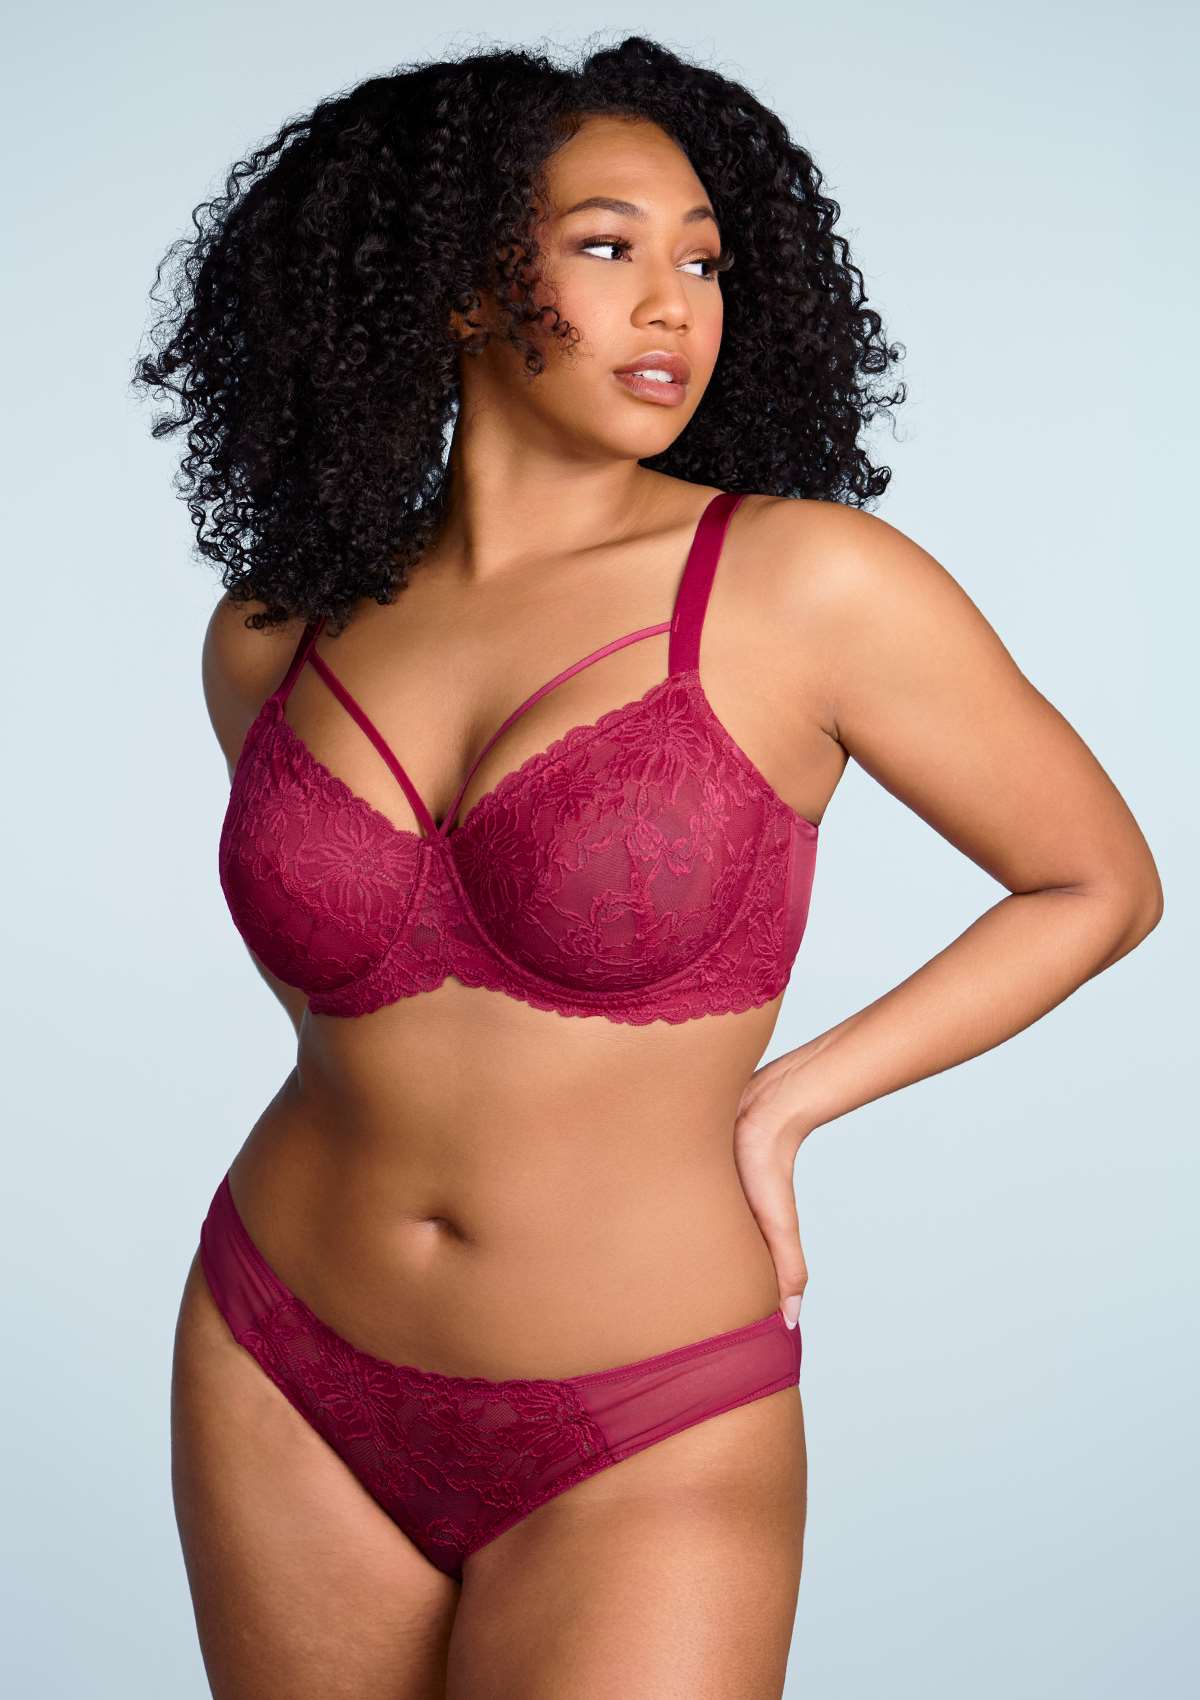 HSIA Pretty In Petals Lace Panties And Bra Set: Plus Size Women Bra - Red / 40 / C